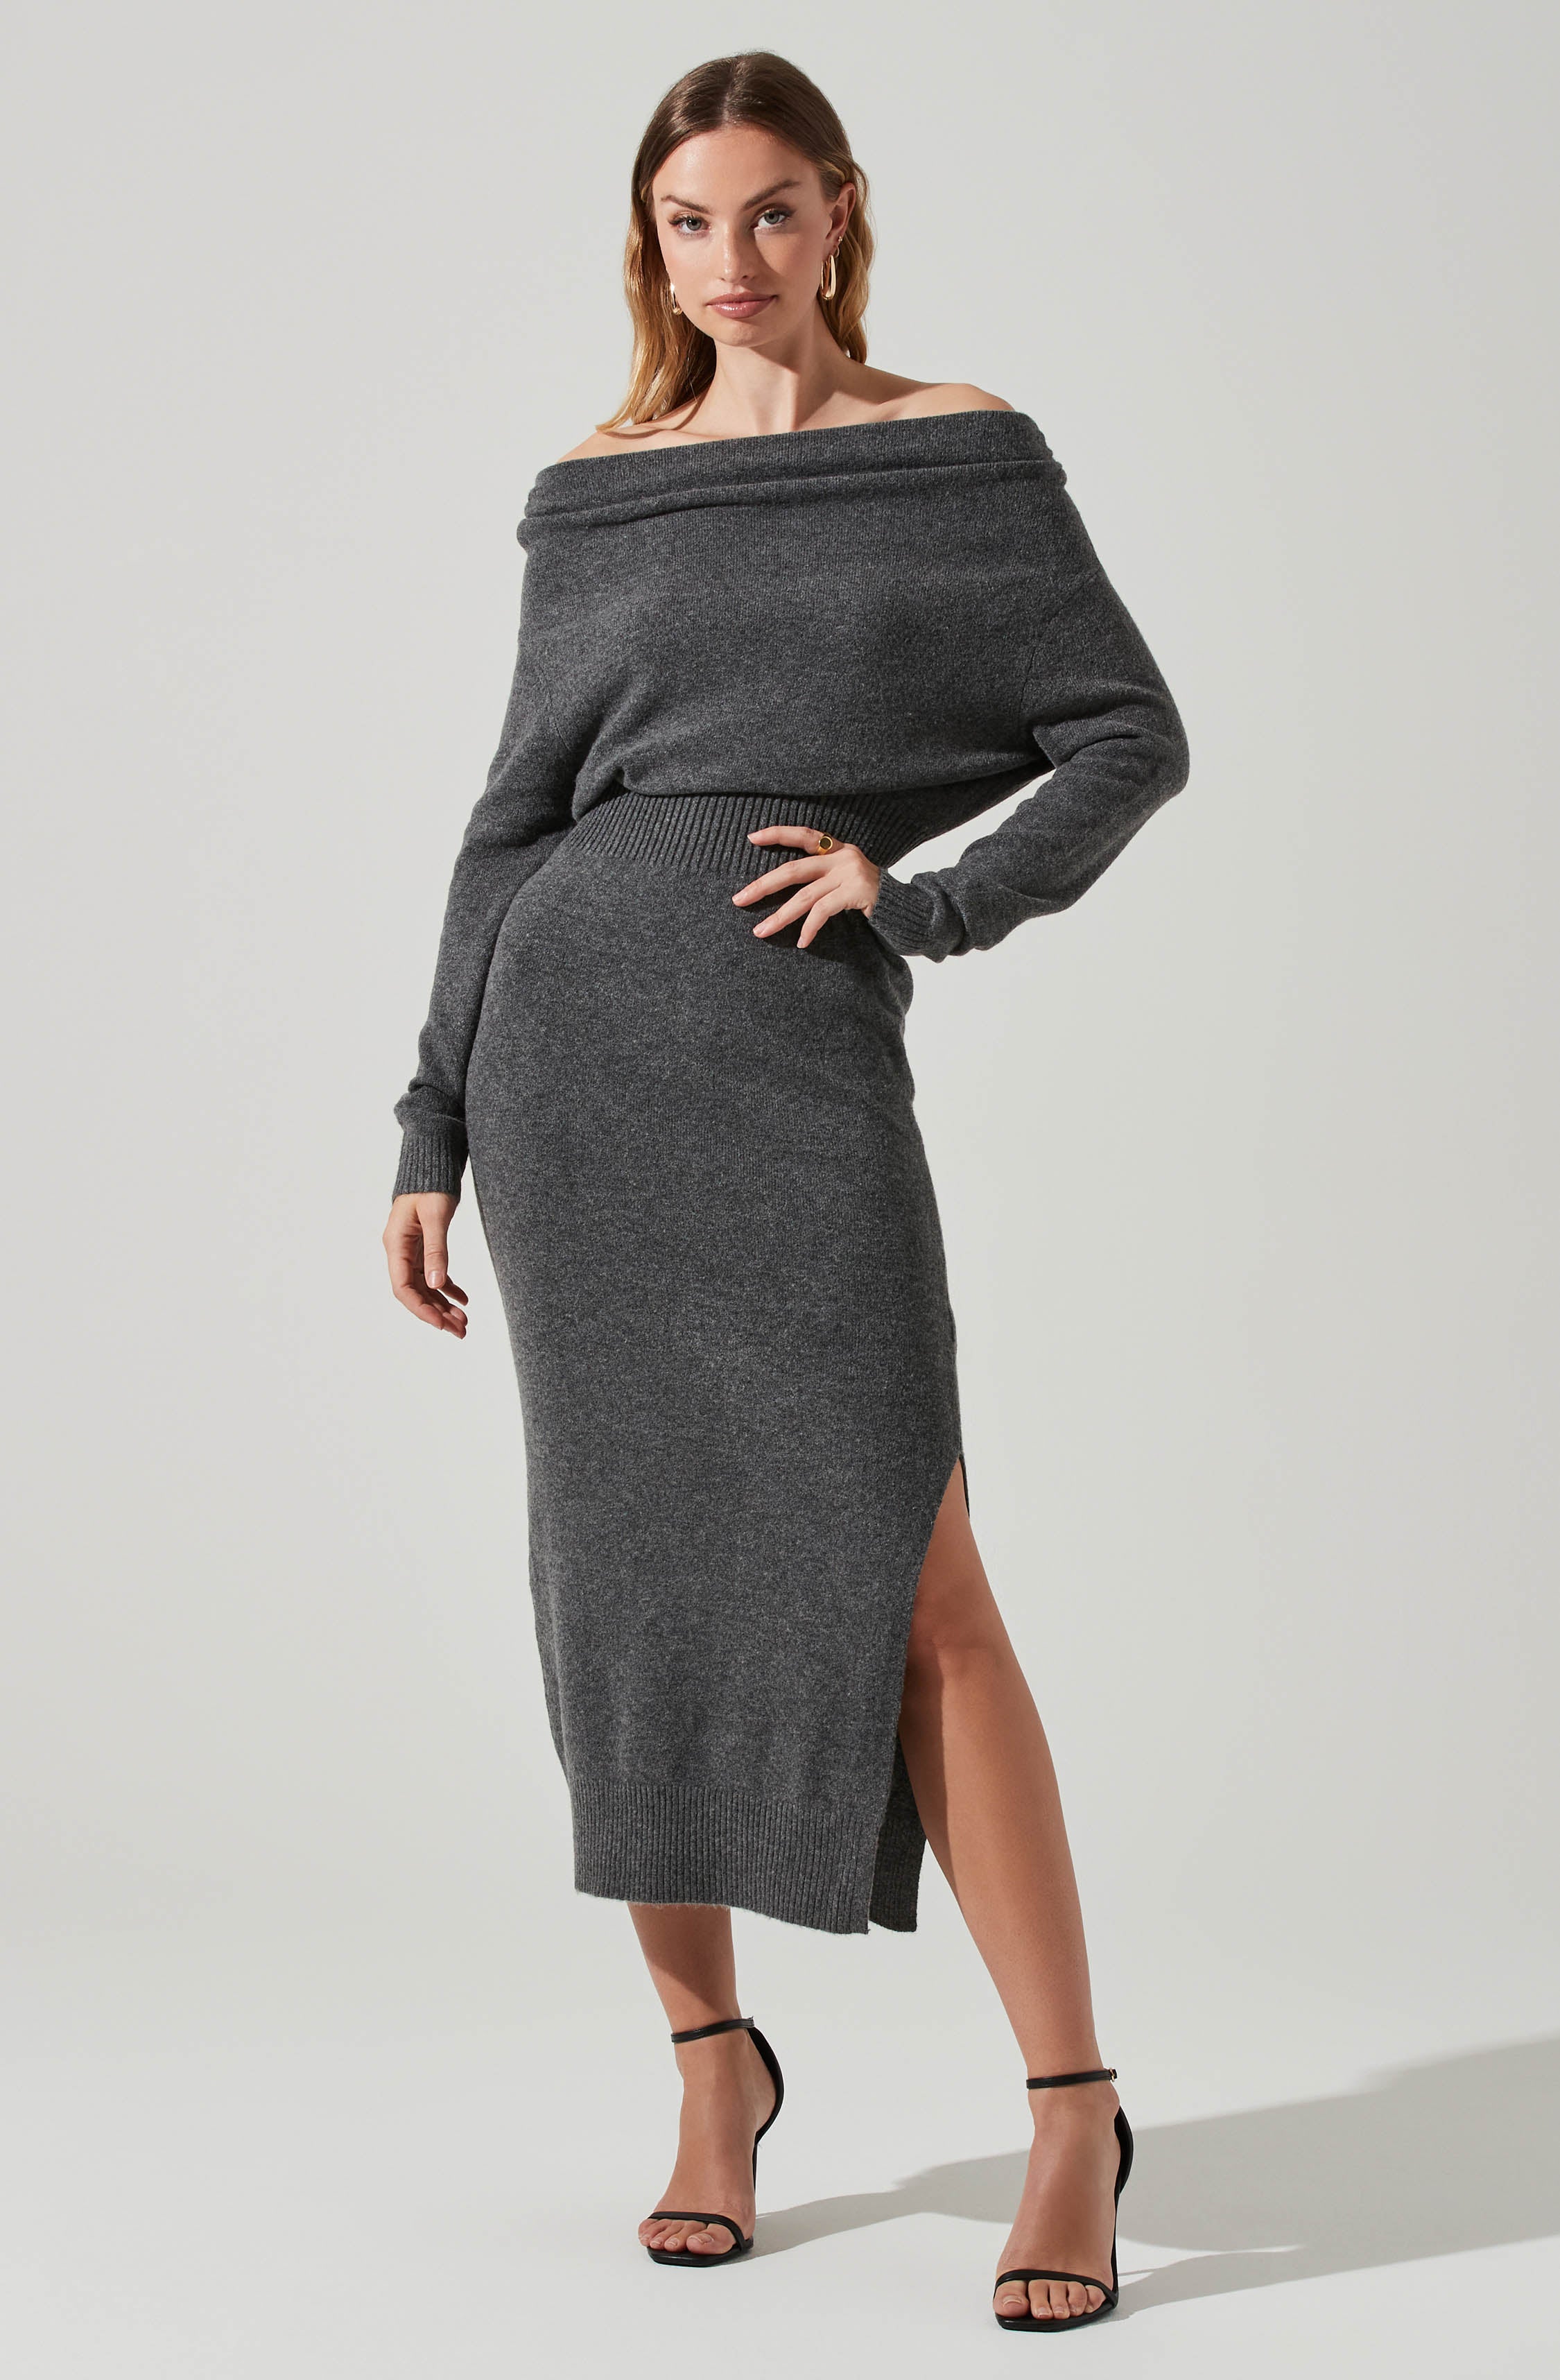 Sweater Dresses: Midi, Off The Shoulder, Long, Black, Brown, Maxi – ASTR  The Label